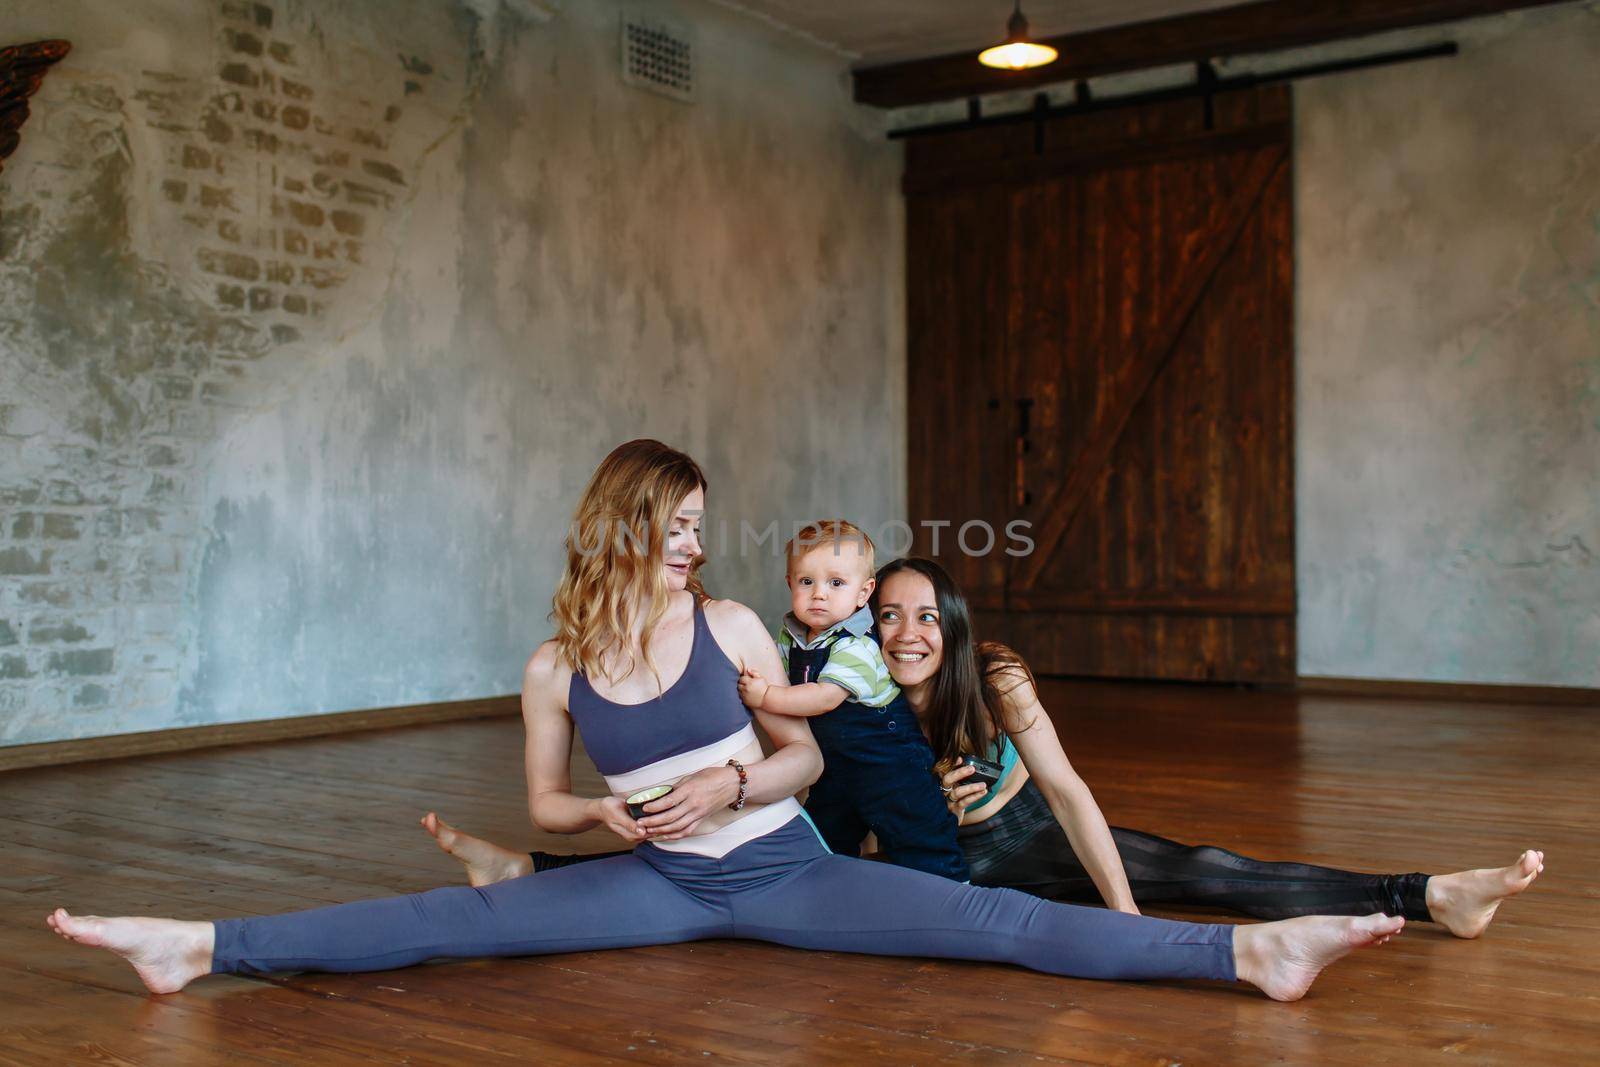 Conversation and tea with two yogis in the loft. A child playing next to the yogis by deandy